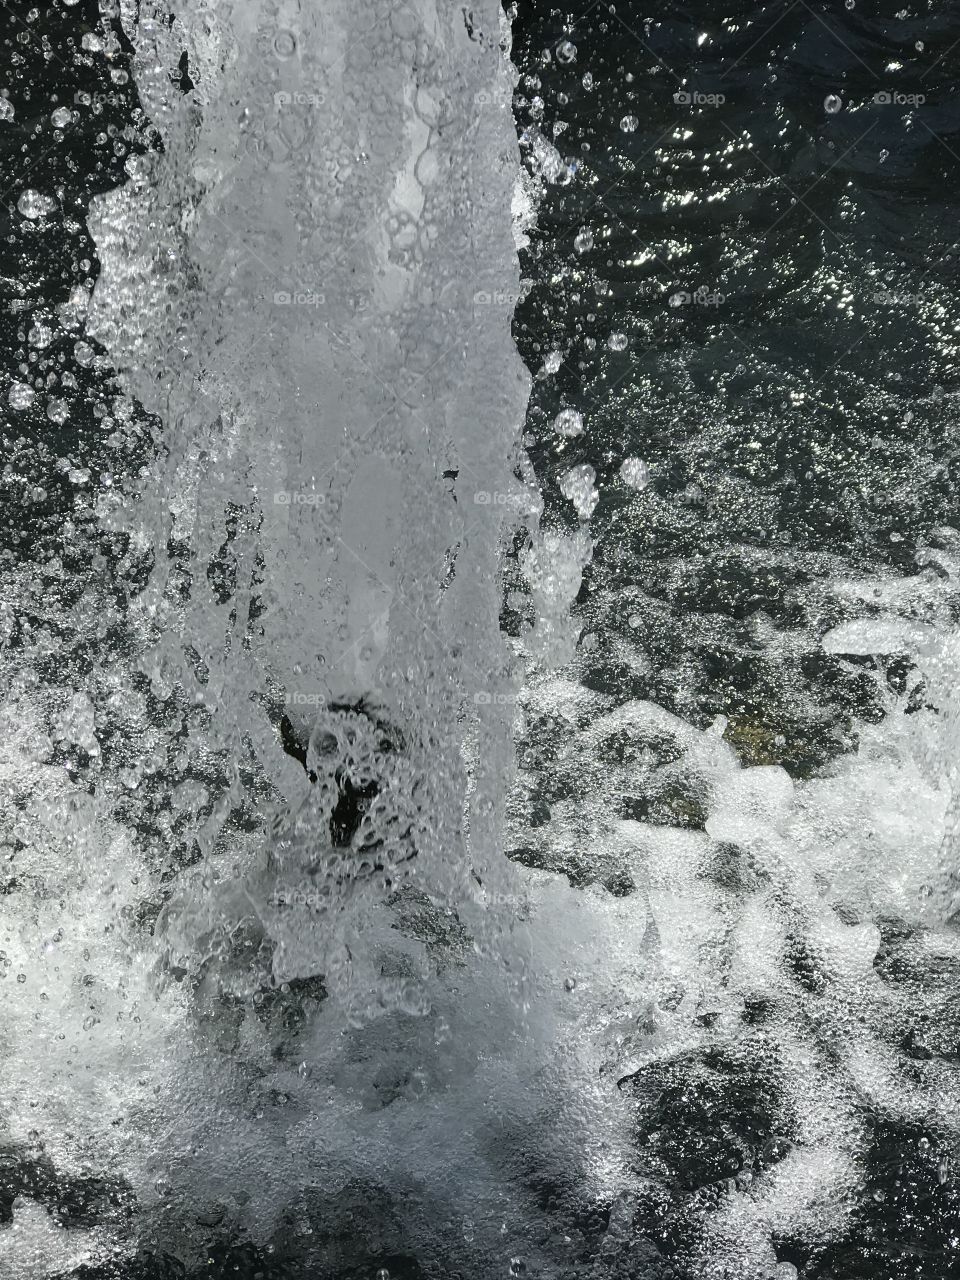 water in motion 2